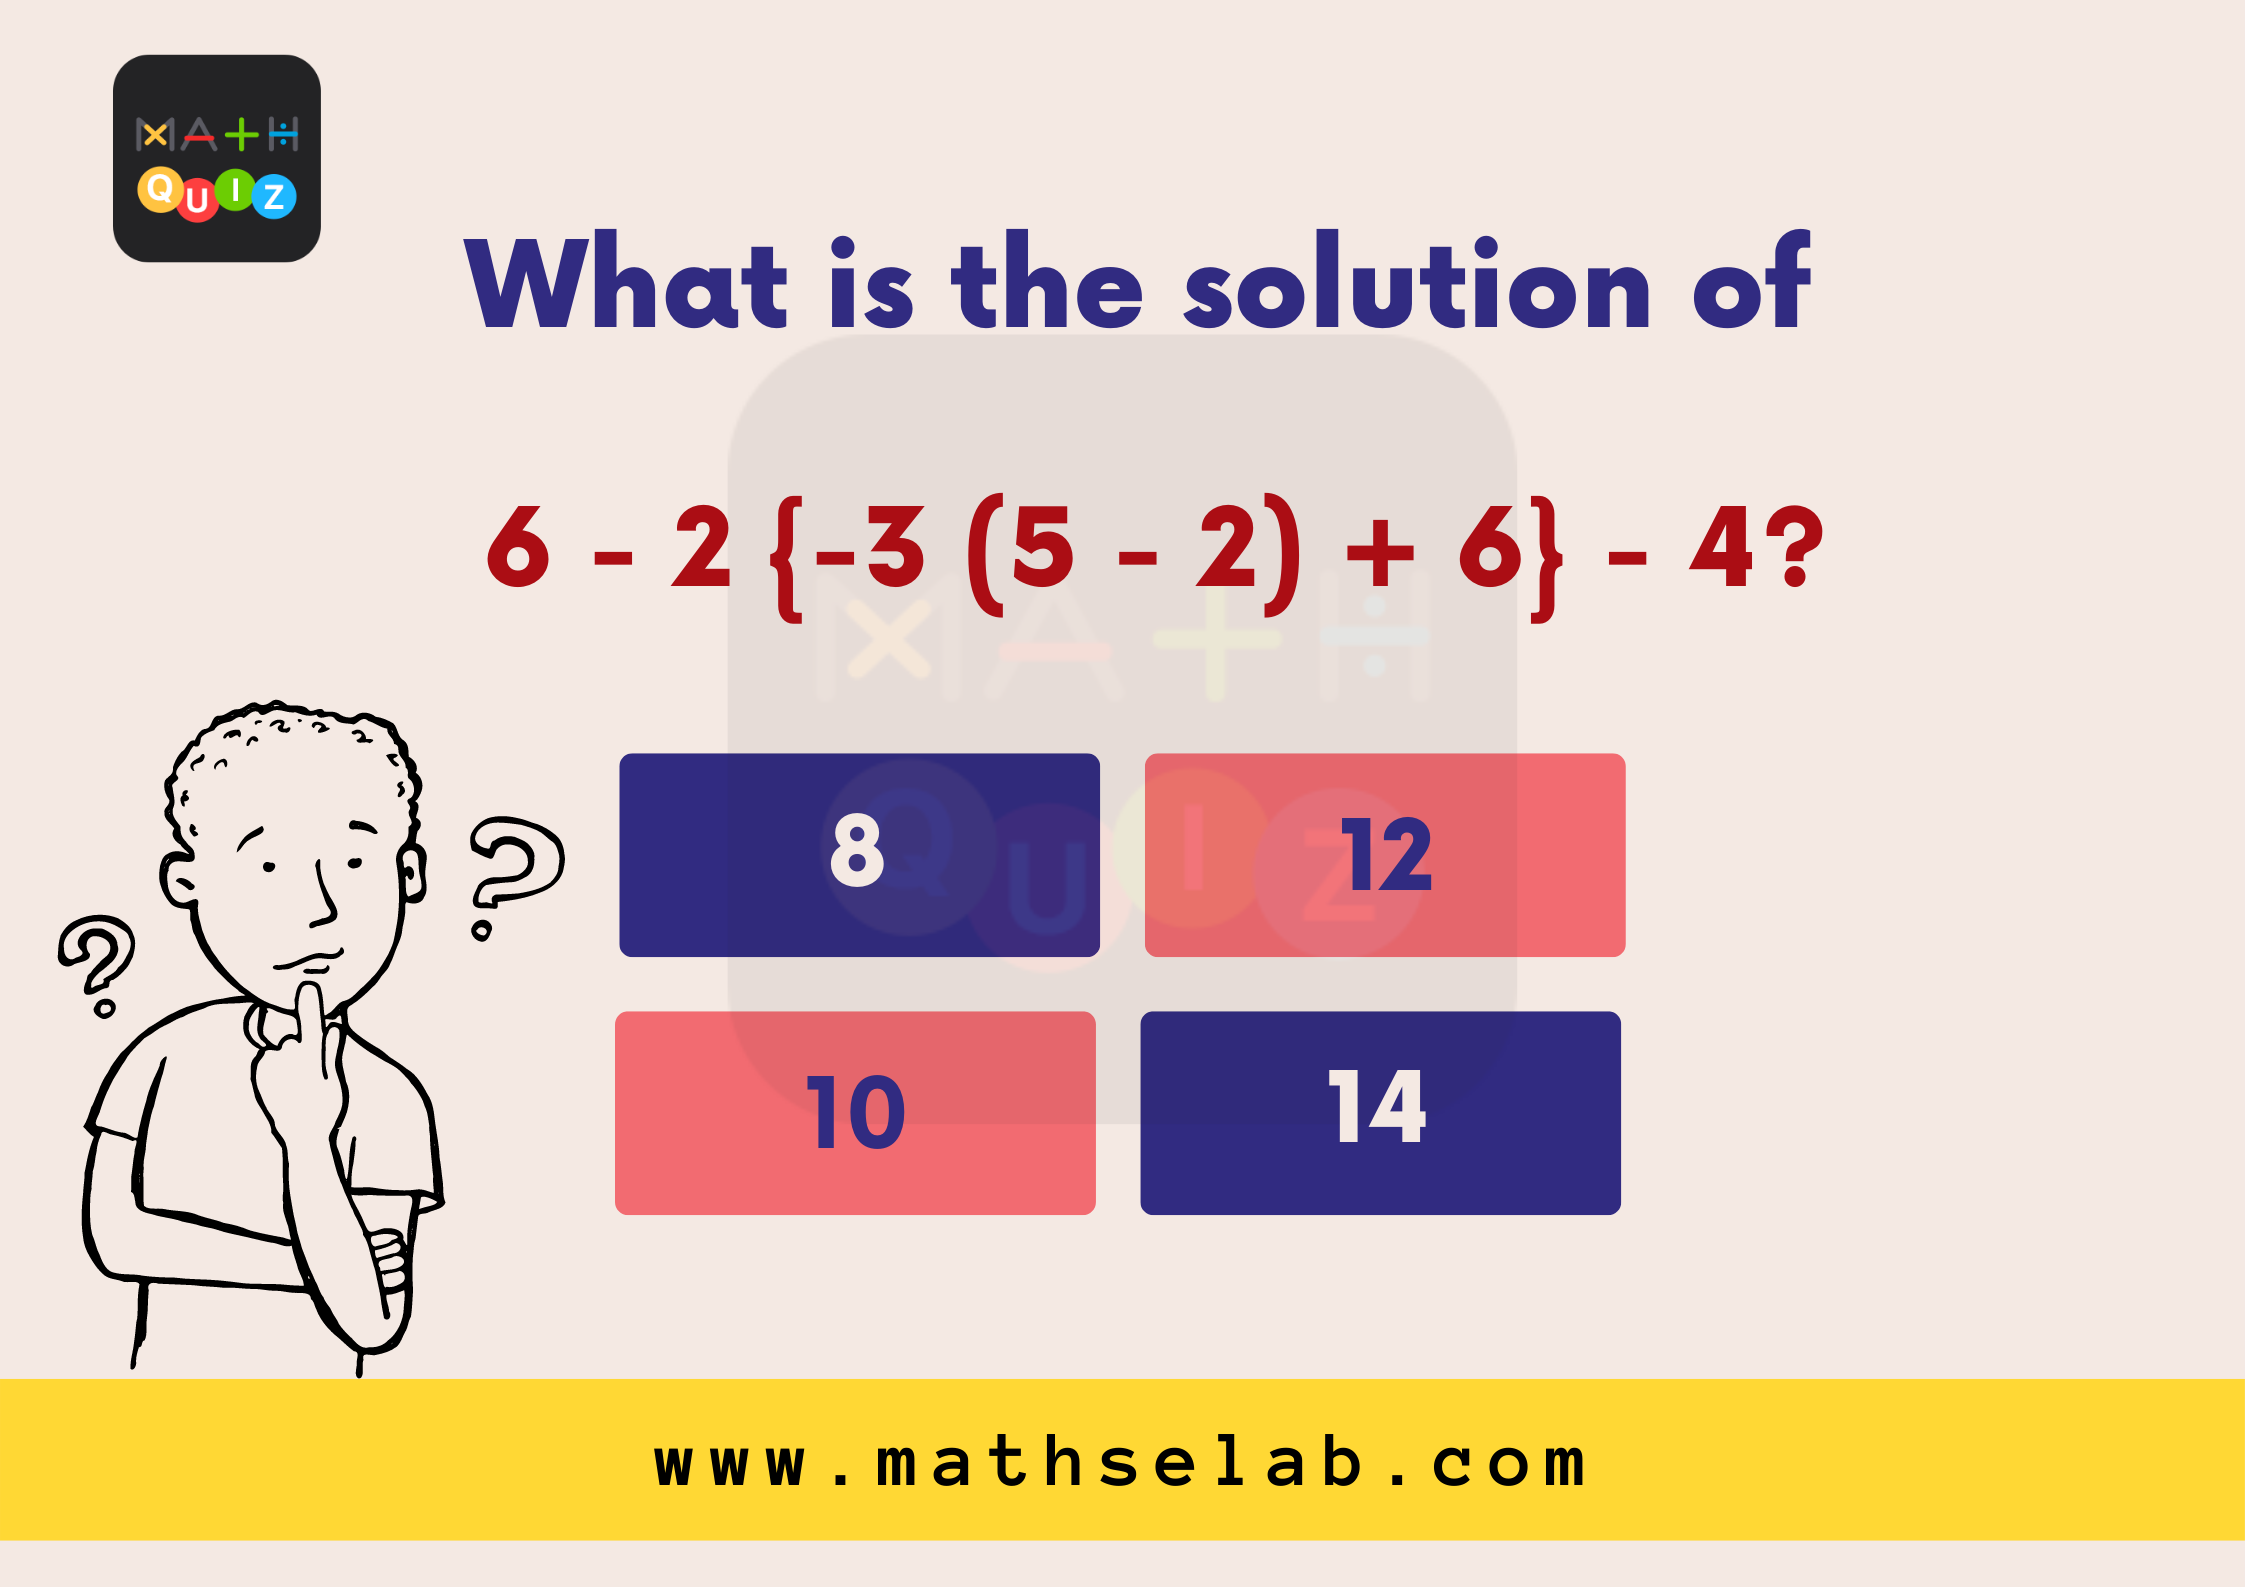 What is the solution of 6 - 2 {-3 (5 - 2) + 6} - 4?